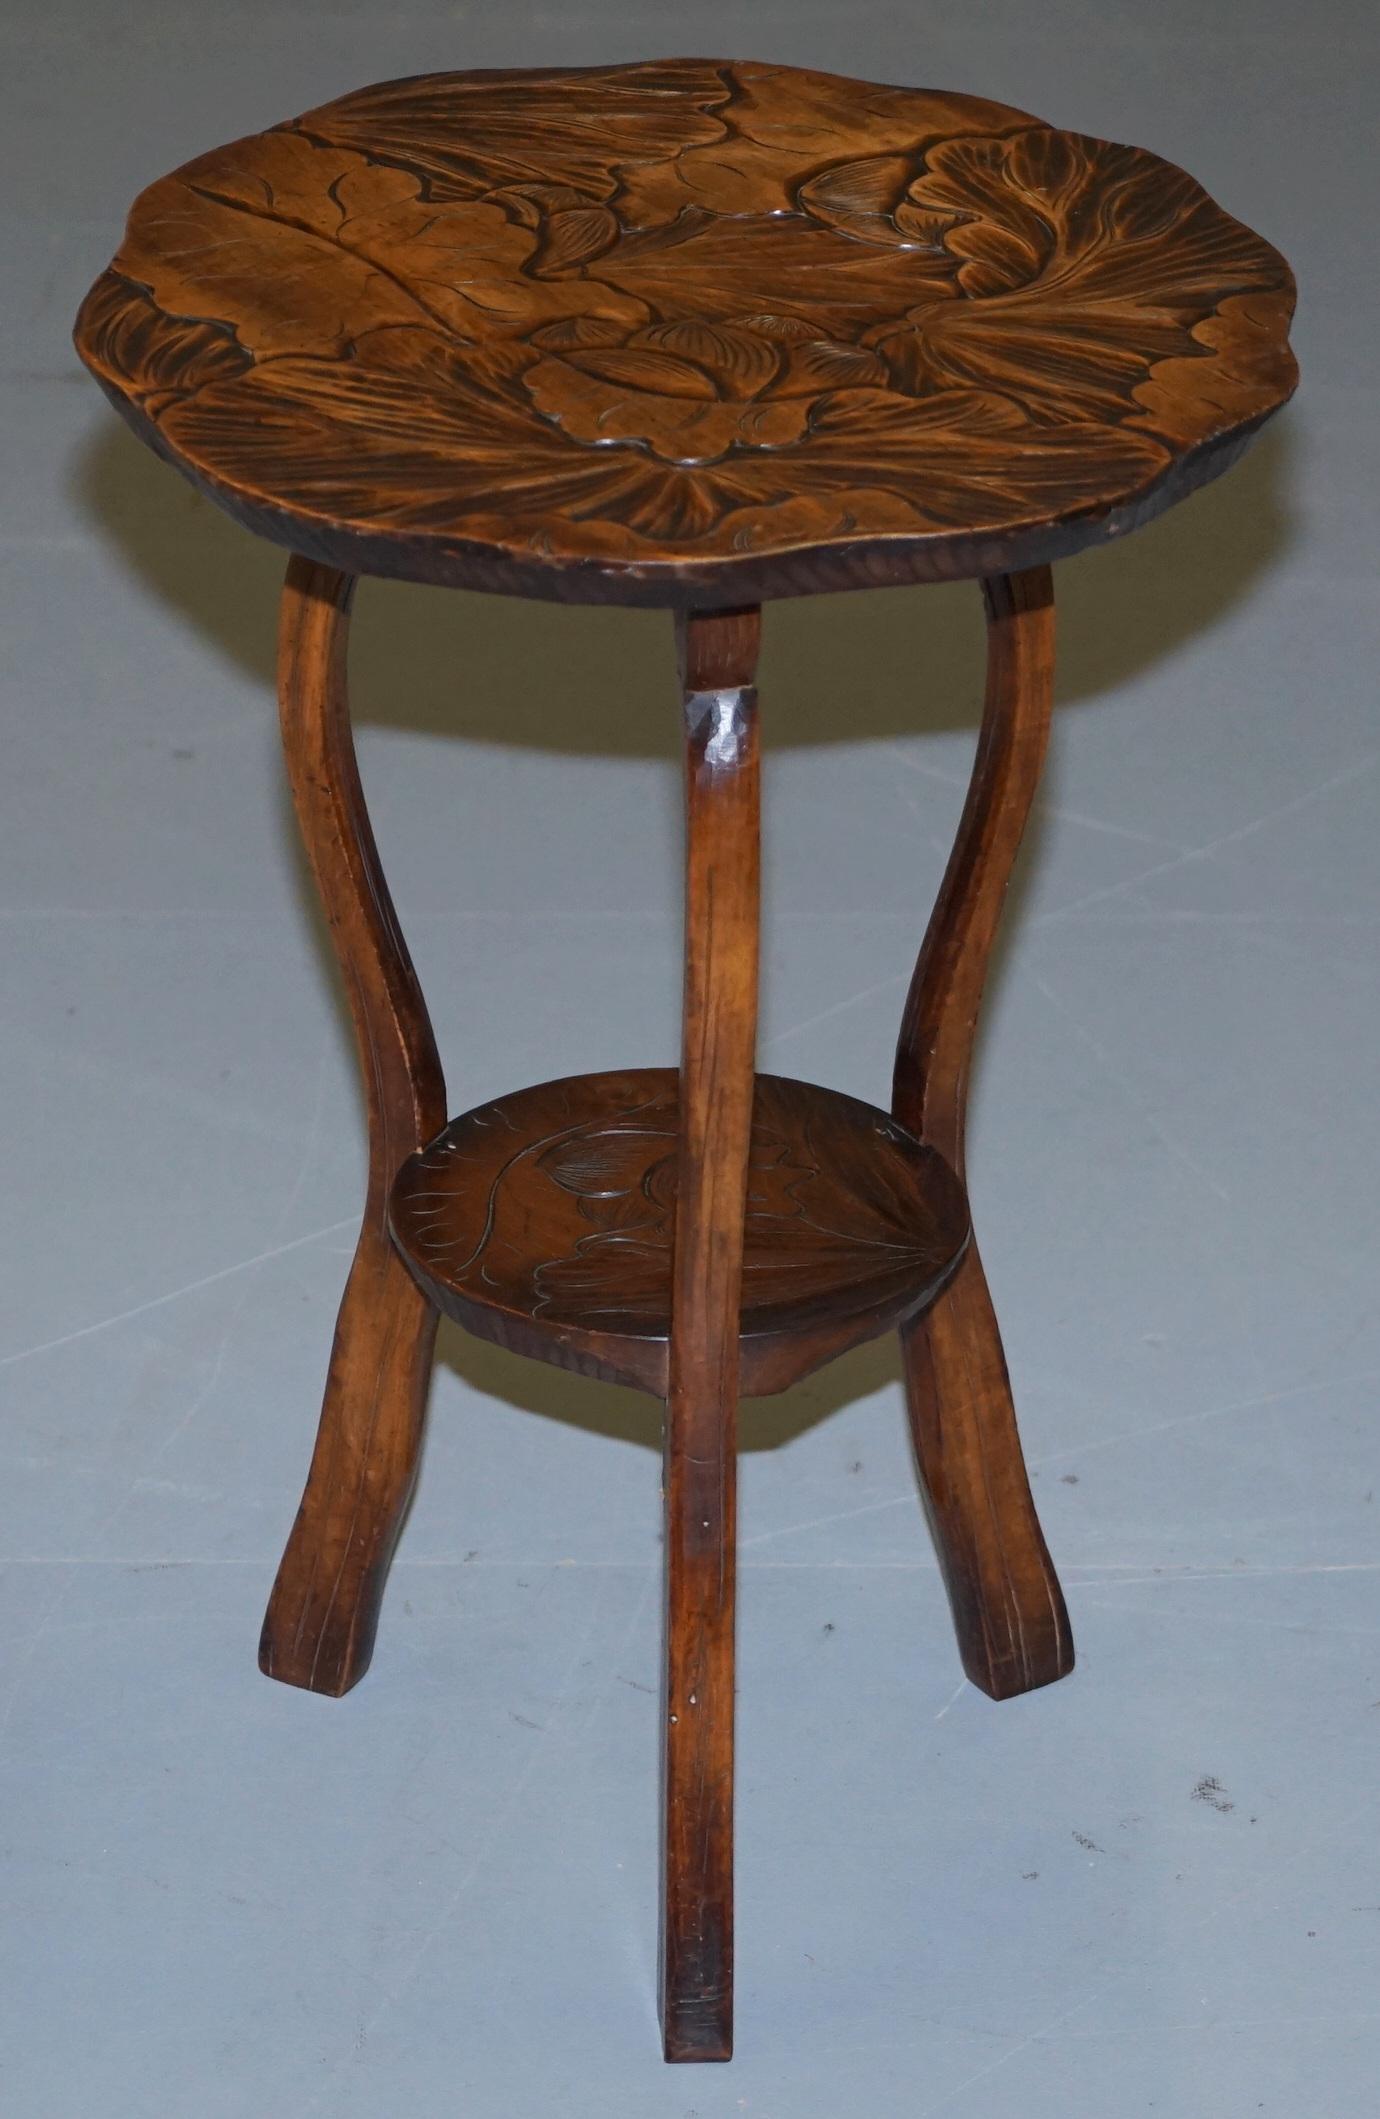 We are delighted to this lovely rare round Liberty’s London 1905 Japanese mahogany side table

A good looking piece, its hand carved from top to bottom with floral detailing, I have another of these shorter and wider listed under my other